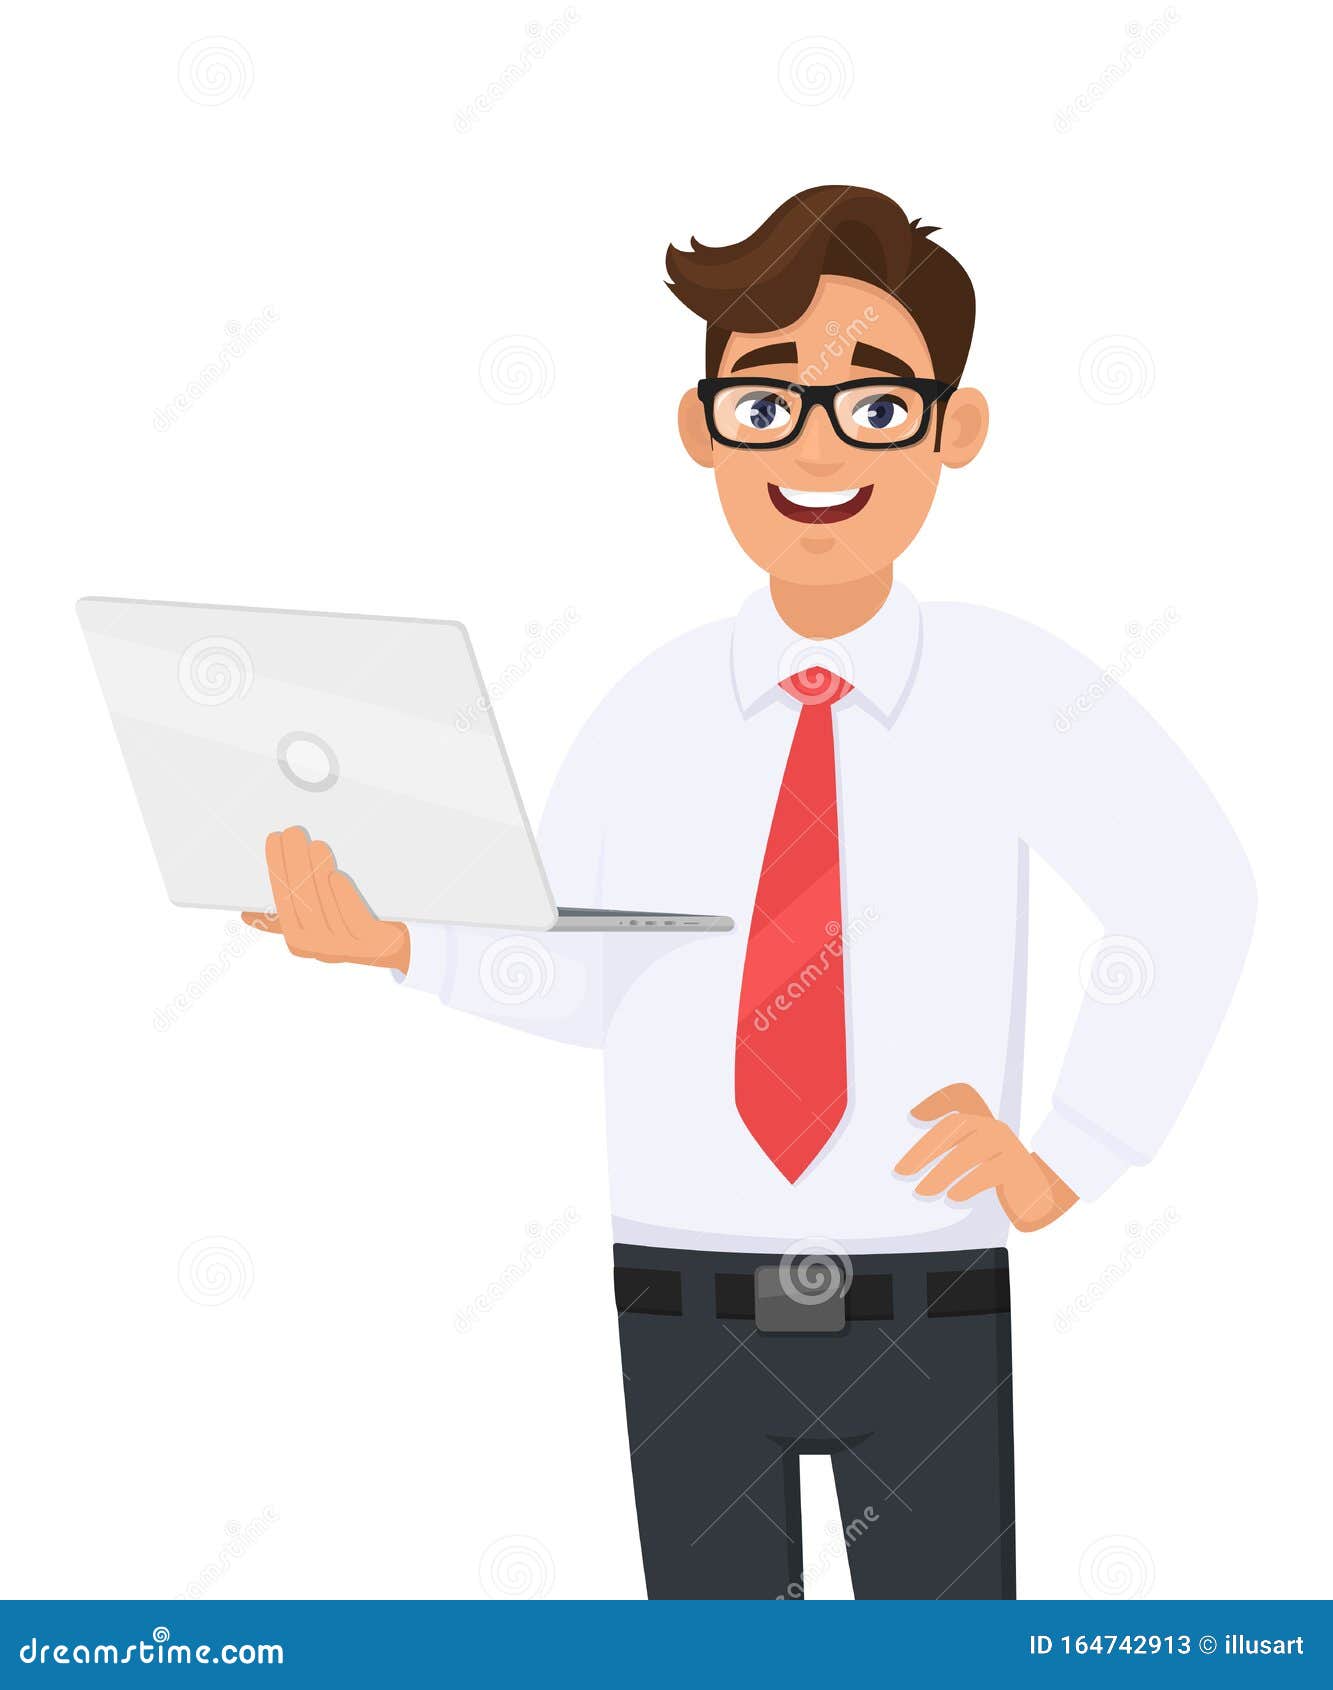 https://thumbs.dreamstime.com/z/young-businessman-holding-new-brand-laptop-trendy-person-using-latest-computer-male-character-design-illustration-modern-young-164742913.jpg